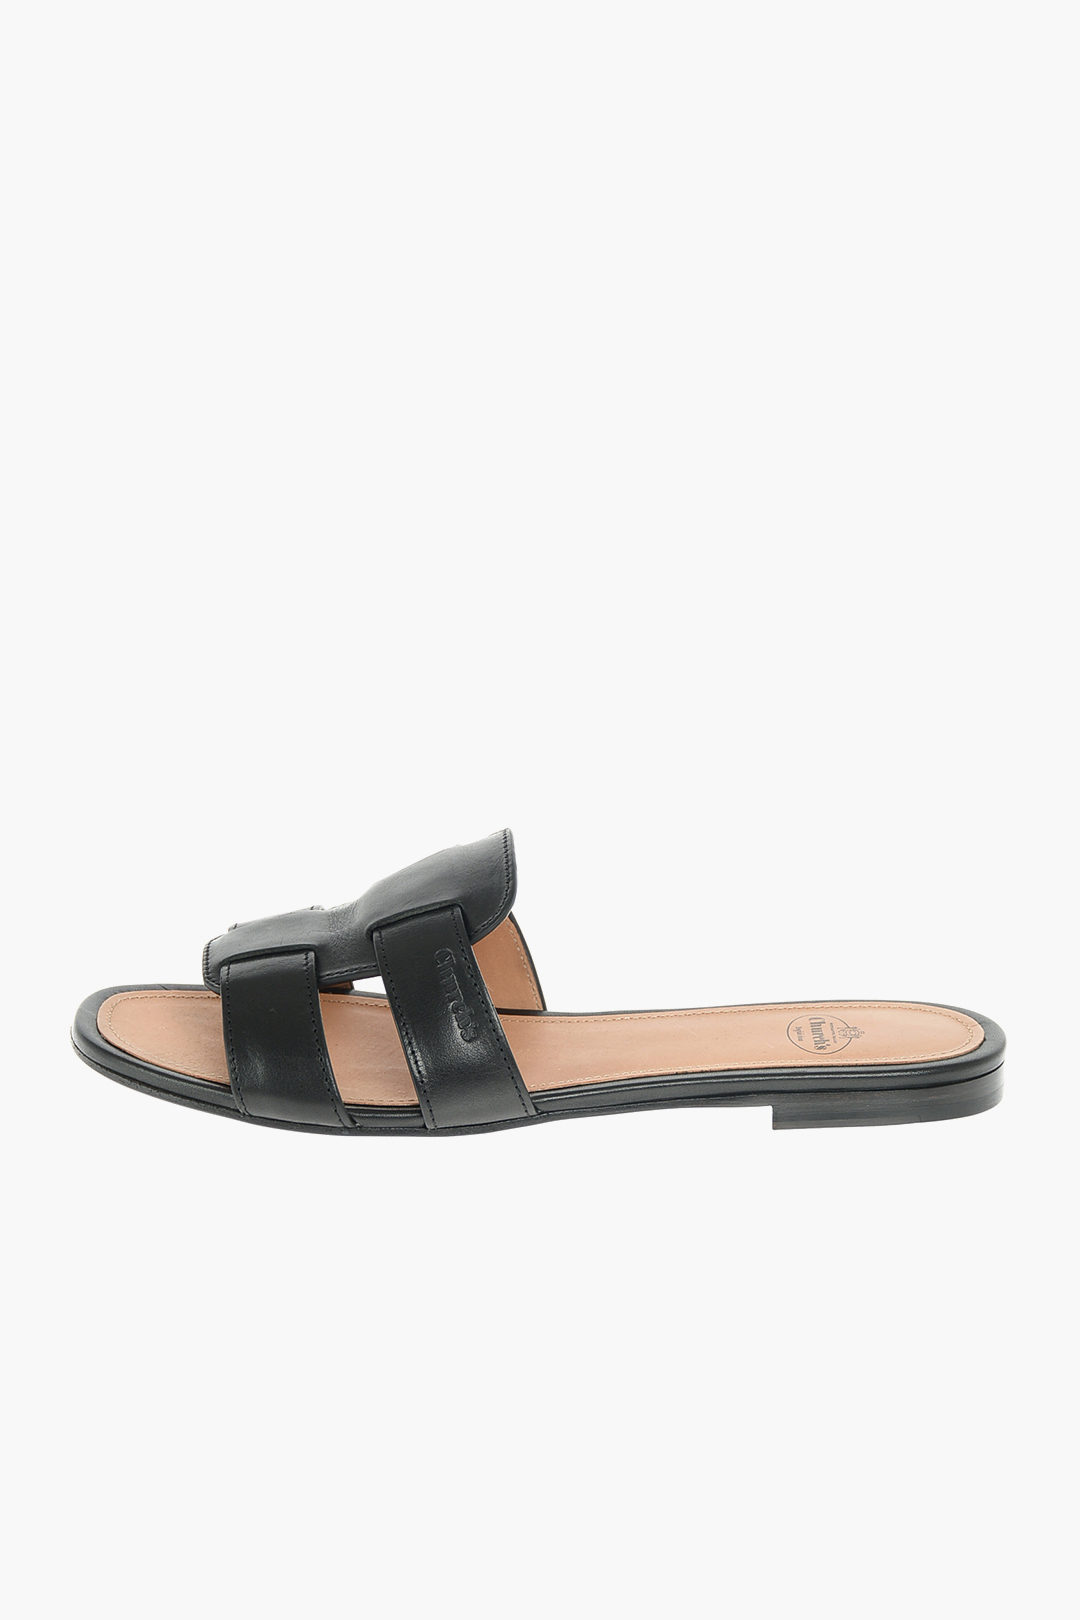 Church's Leather DEE DEE Flat Sandals women - Glamood Outlet